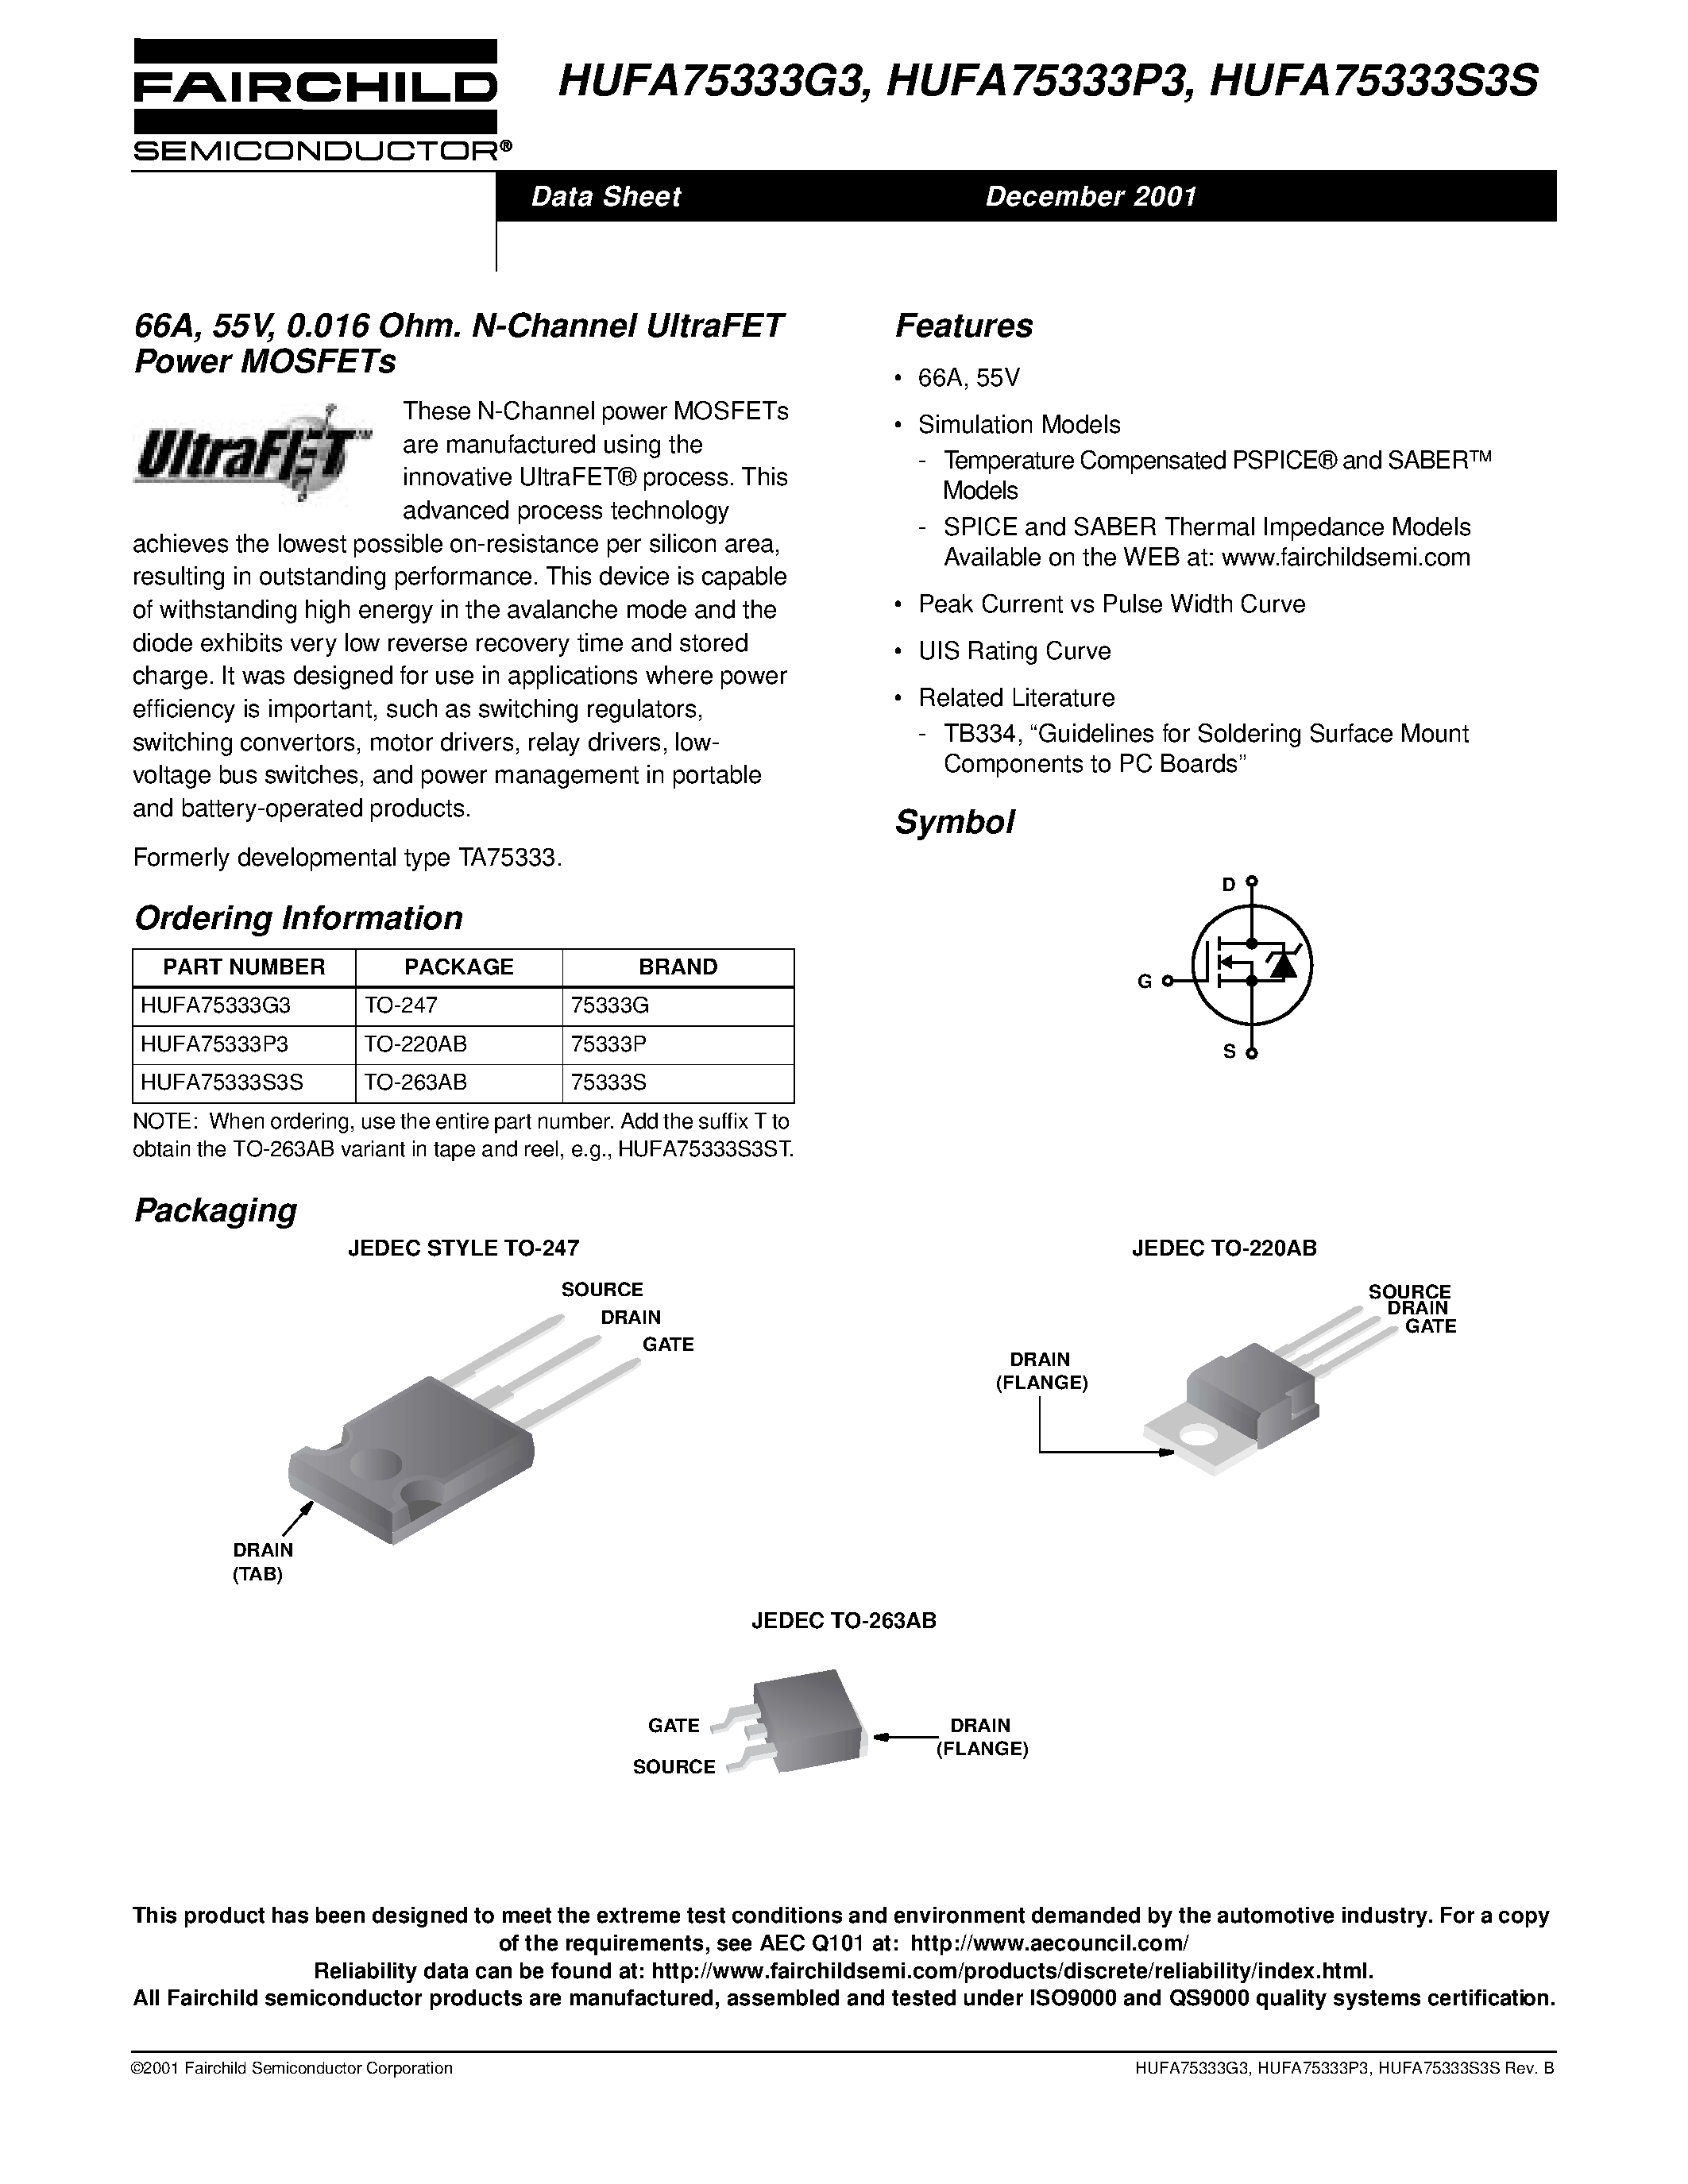 Datasheet HUFA75337P3 - 75A/ 55V/ 0.014 Ohm/ N-Channel UltraFET Power MOSFETs page 1